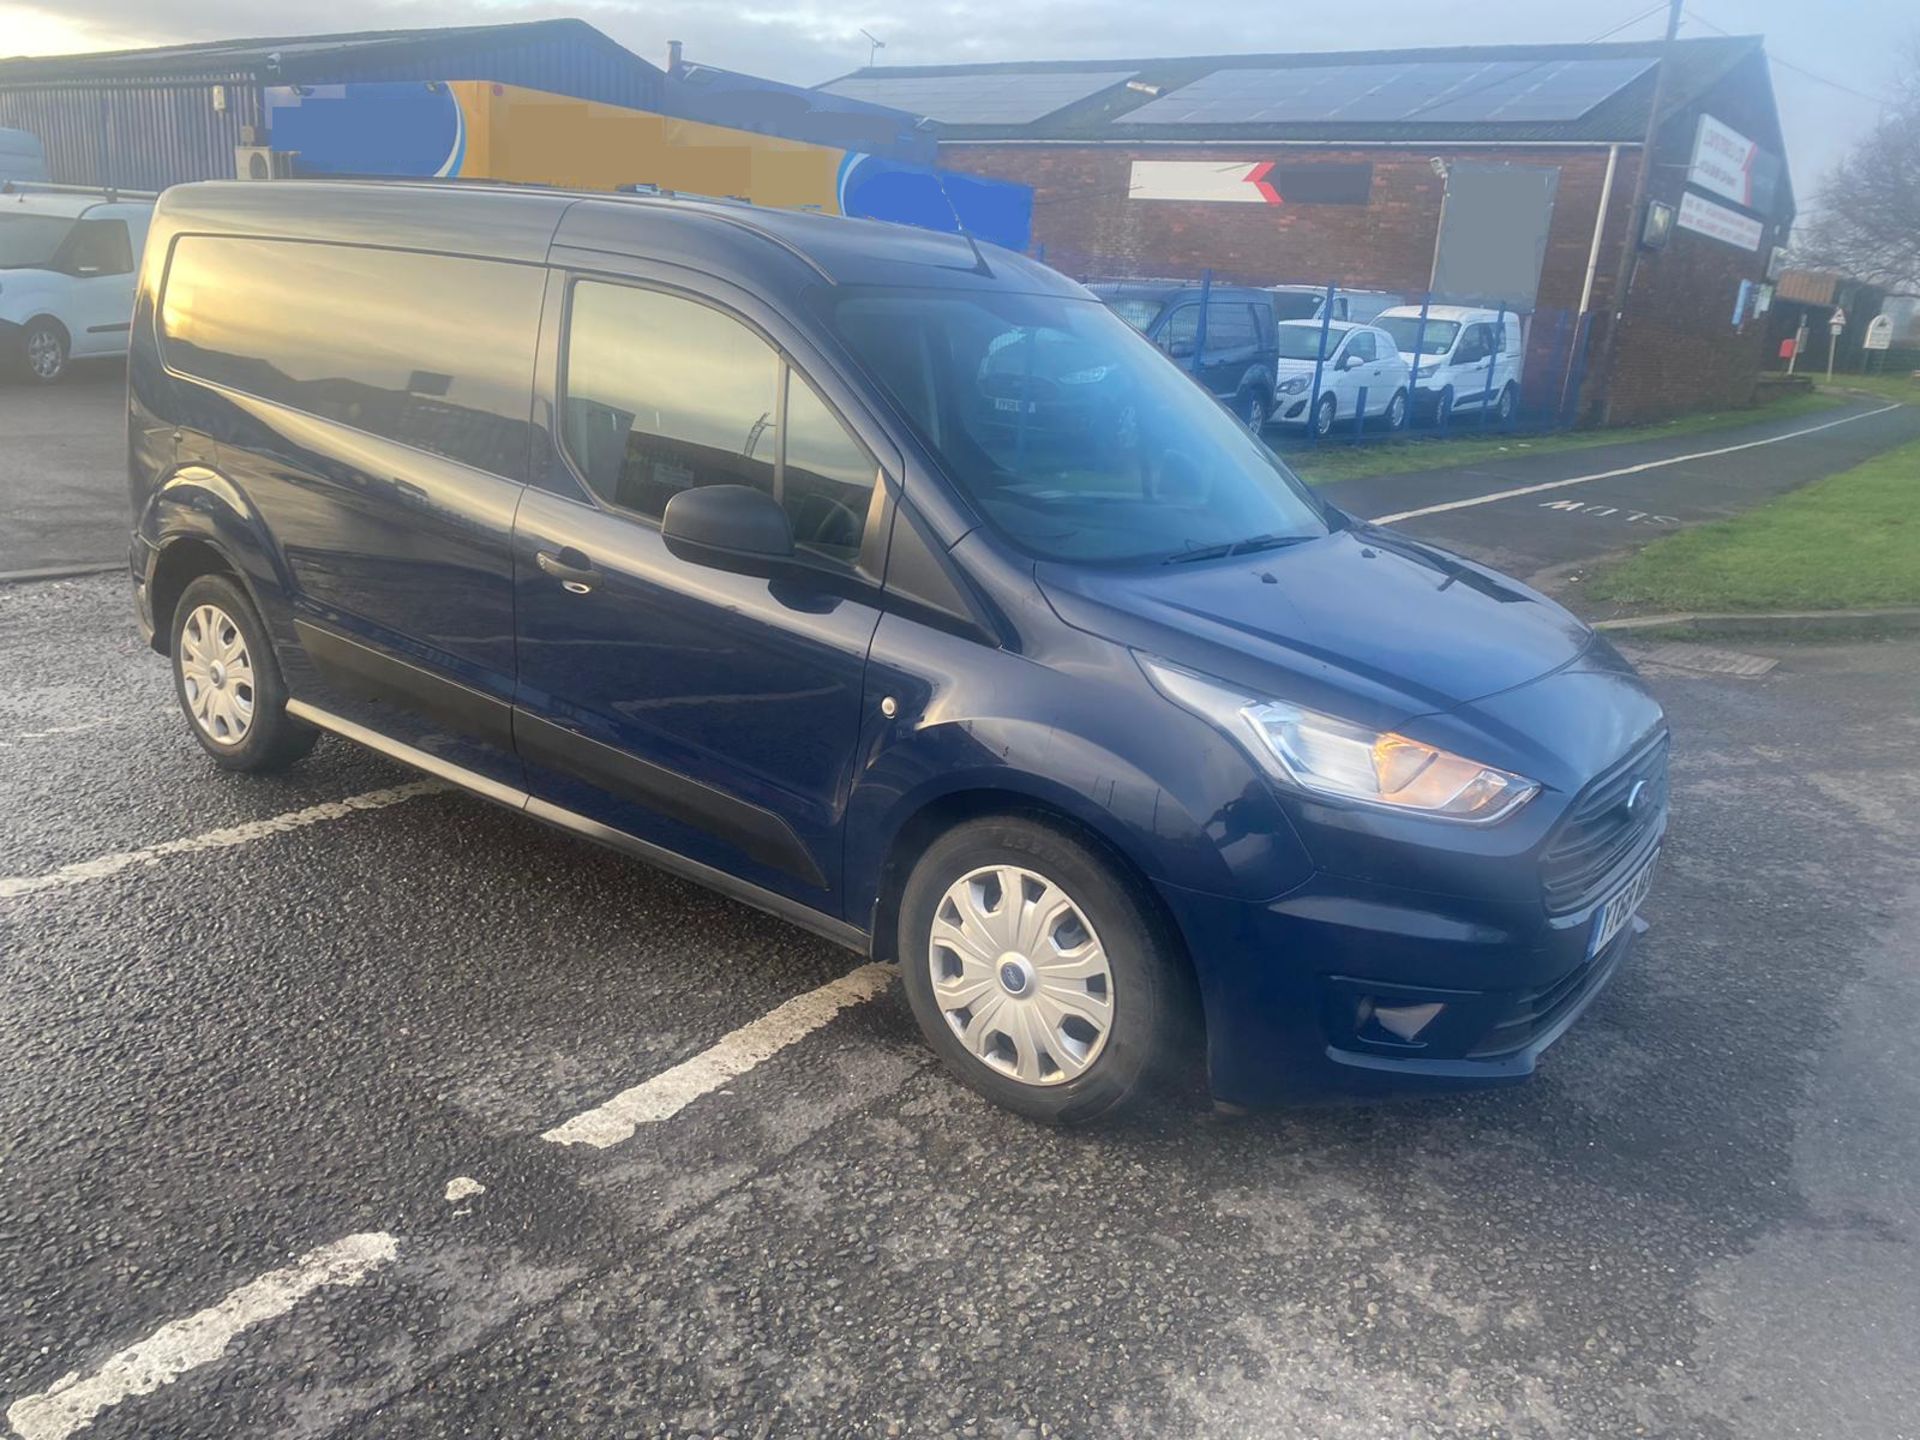 2018 68 FORD TRANSIT CONNECT TREND LWB PANEL VAN - 3 SEATS - NEWER SHAPE - AIR CON